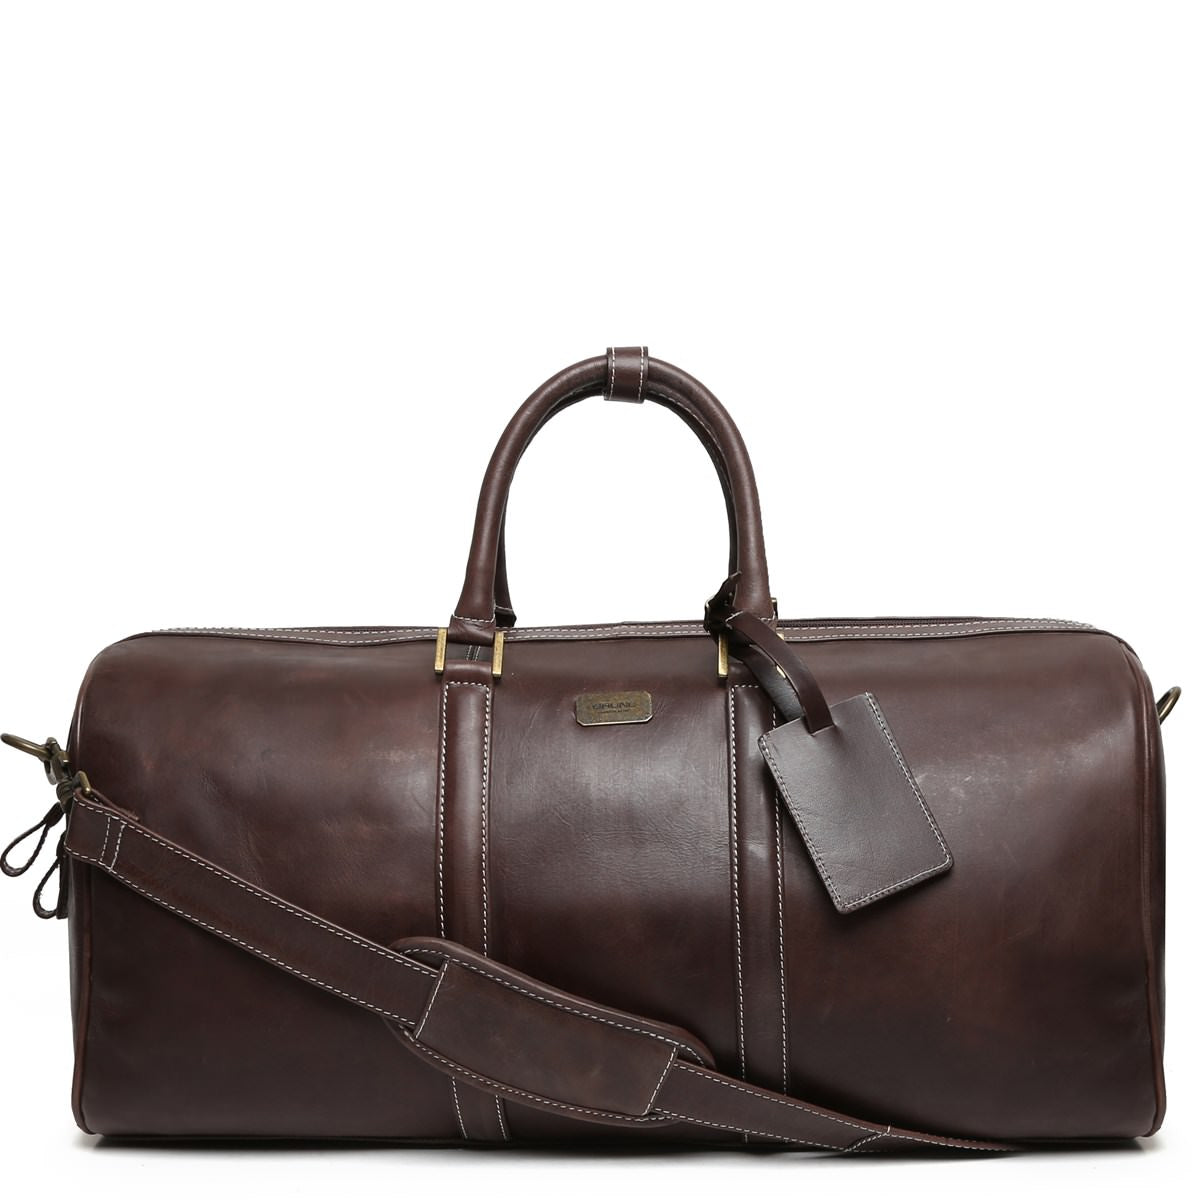 Brown Matte Finish Leather Travel Duffle Bag By Brune